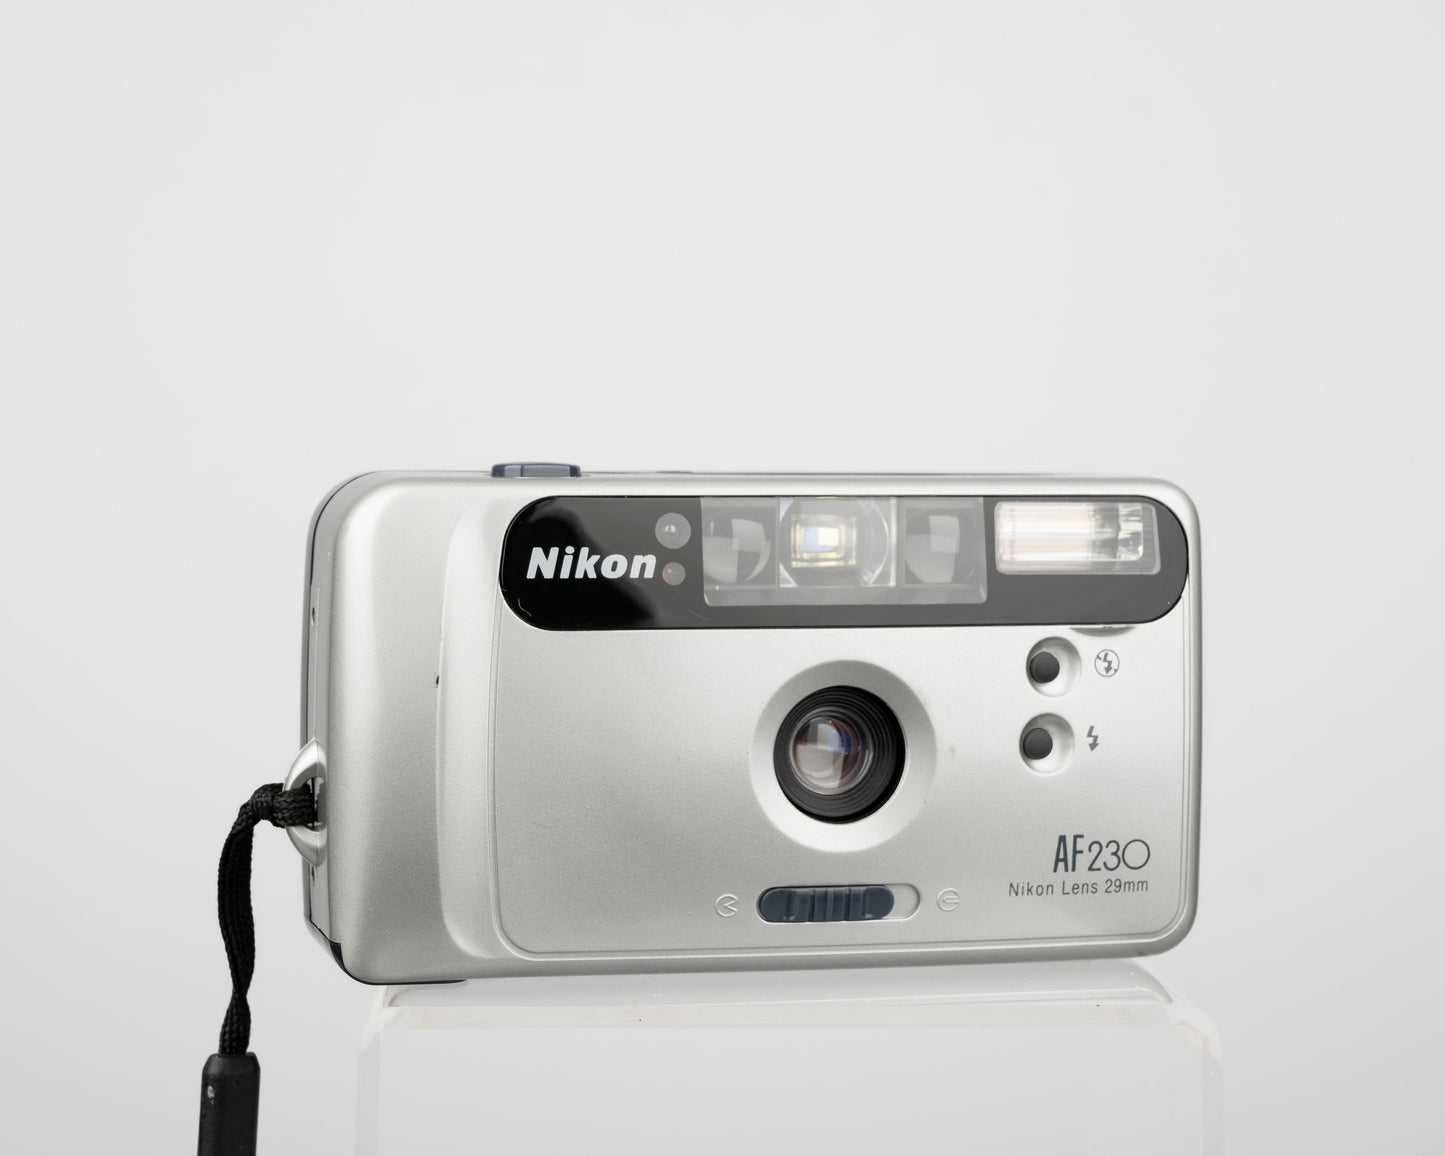 The Nikon AF230 is wide-angle autofocus point-and-shoot 35mm film camera